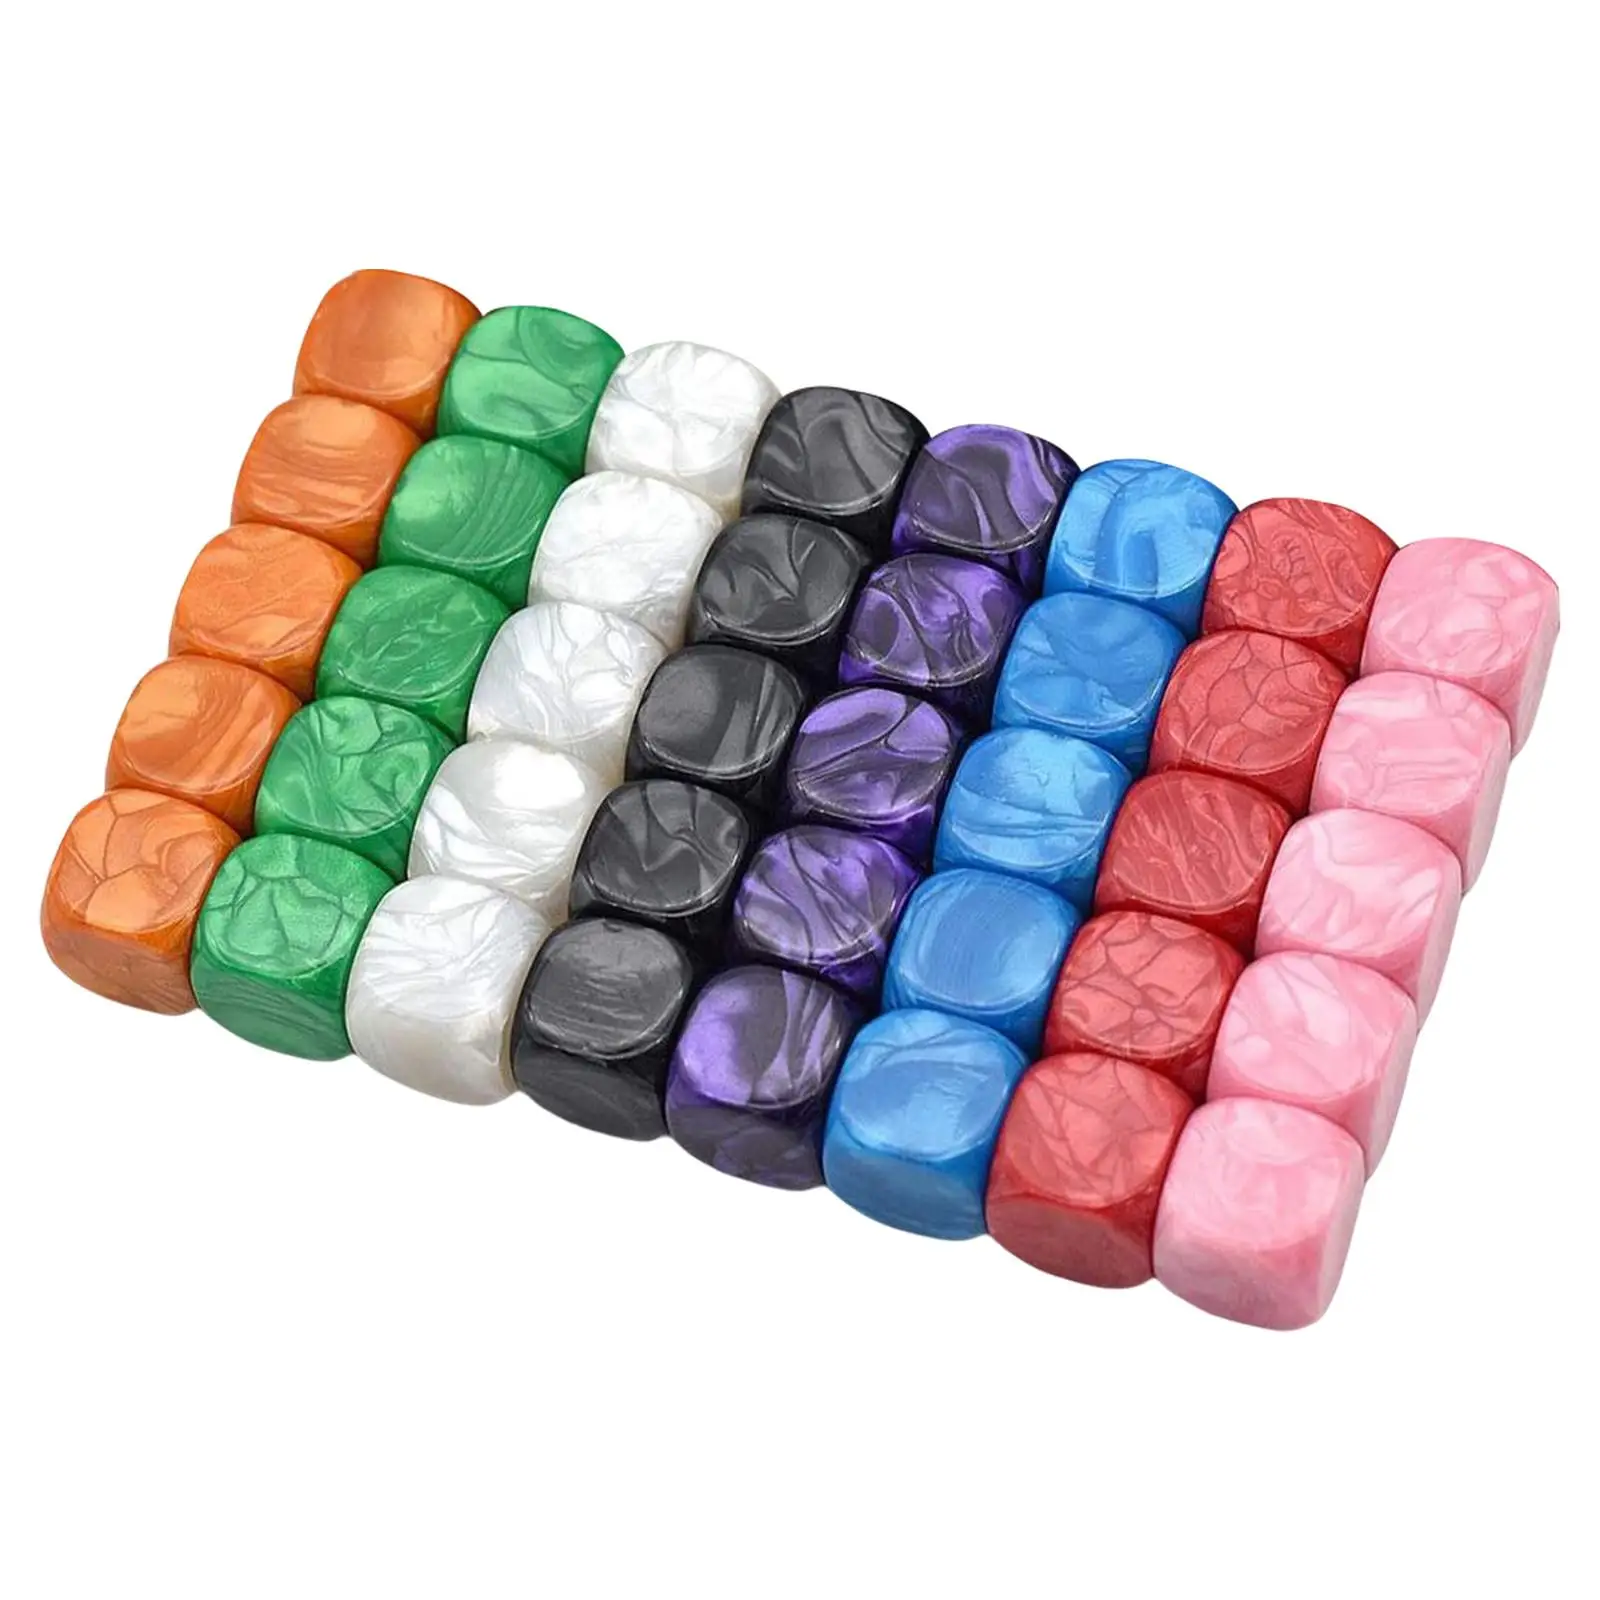 Acrylic 16mm Blank Dices for Math Counting Teaching, Party Supplies, Dices Making, Board Game Accessories, DIY Sticker